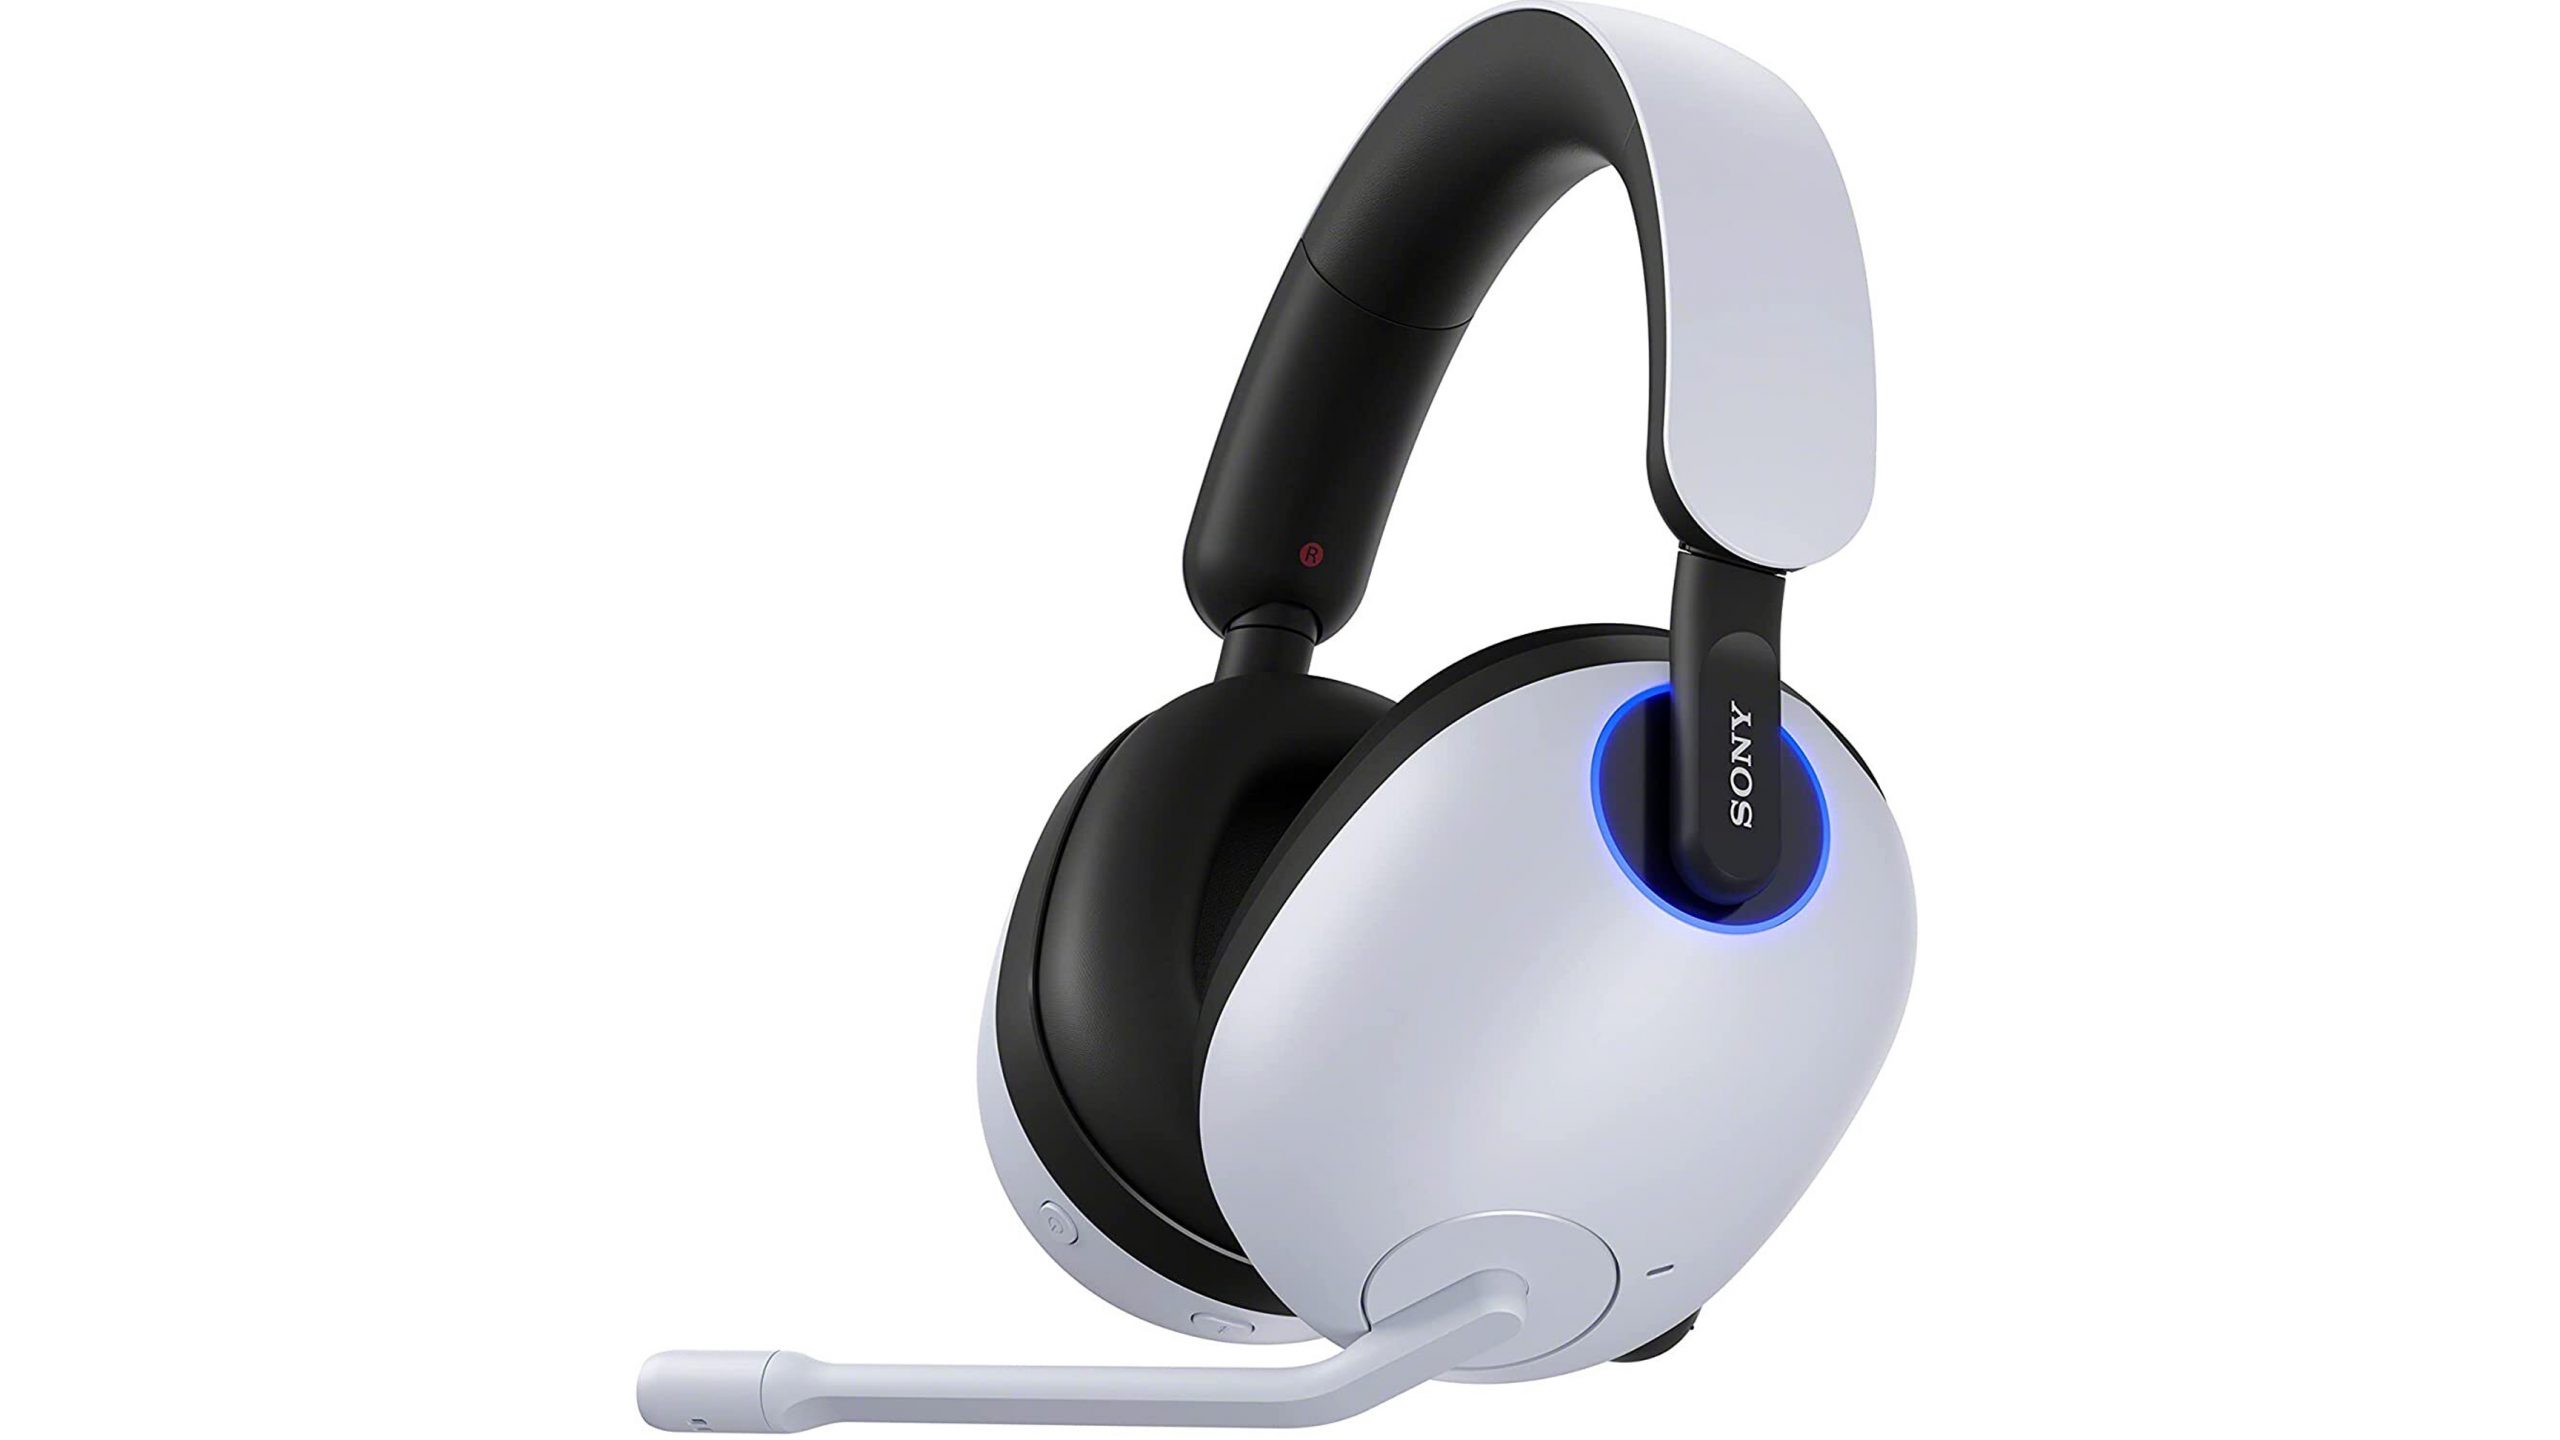  PlayStation Gold Wireless Headset White - PlayStation 4 : Video  Games